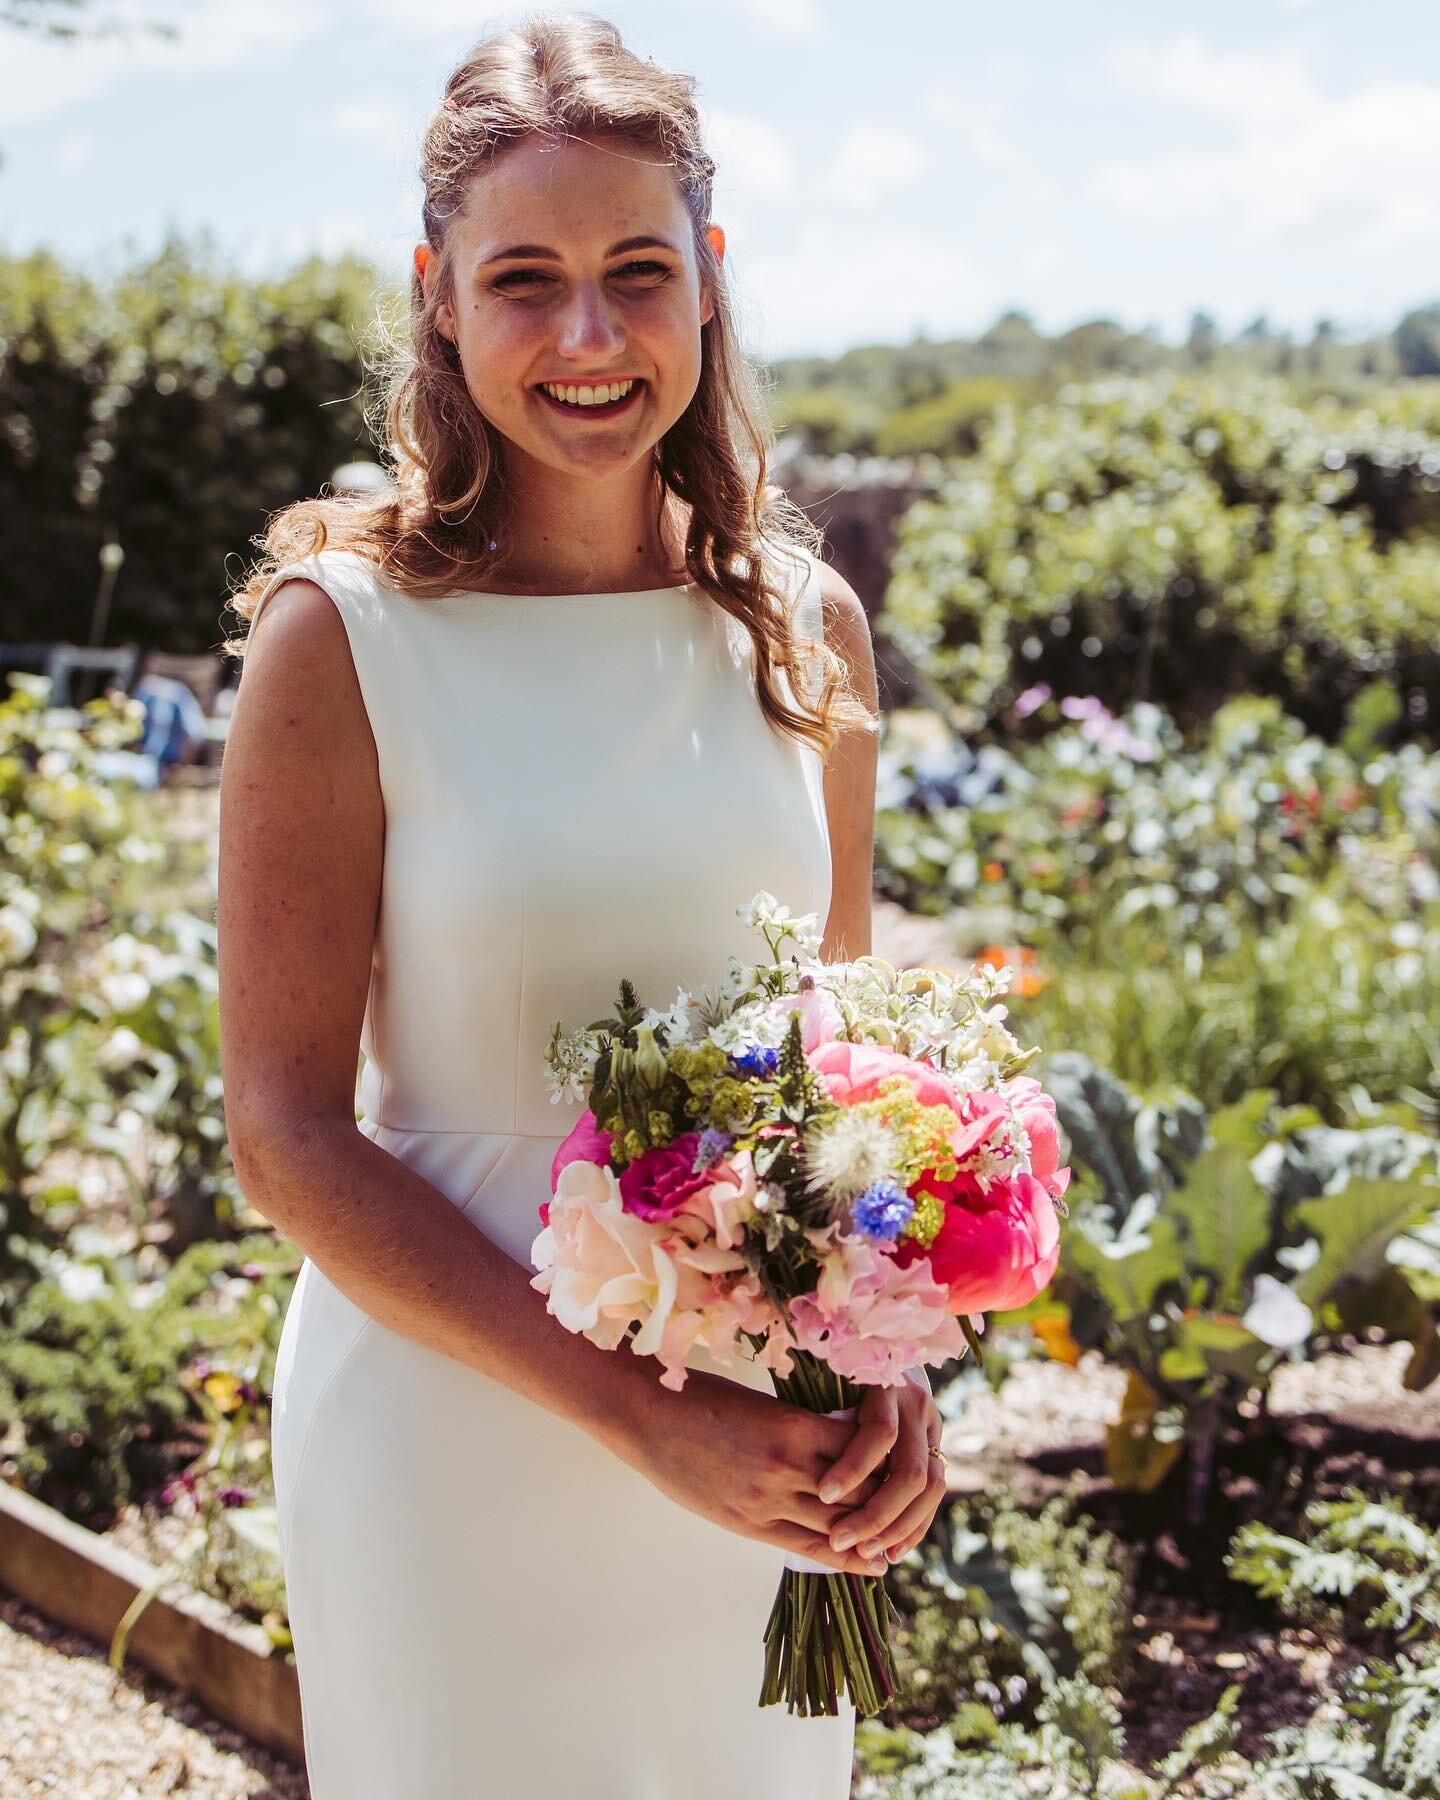 More lovely images of Sarah and her bright,  summery bridal bouquet at River Cottage.
#summerwedding #rivercottage #dorsetflorist #floral #sandinmypockets